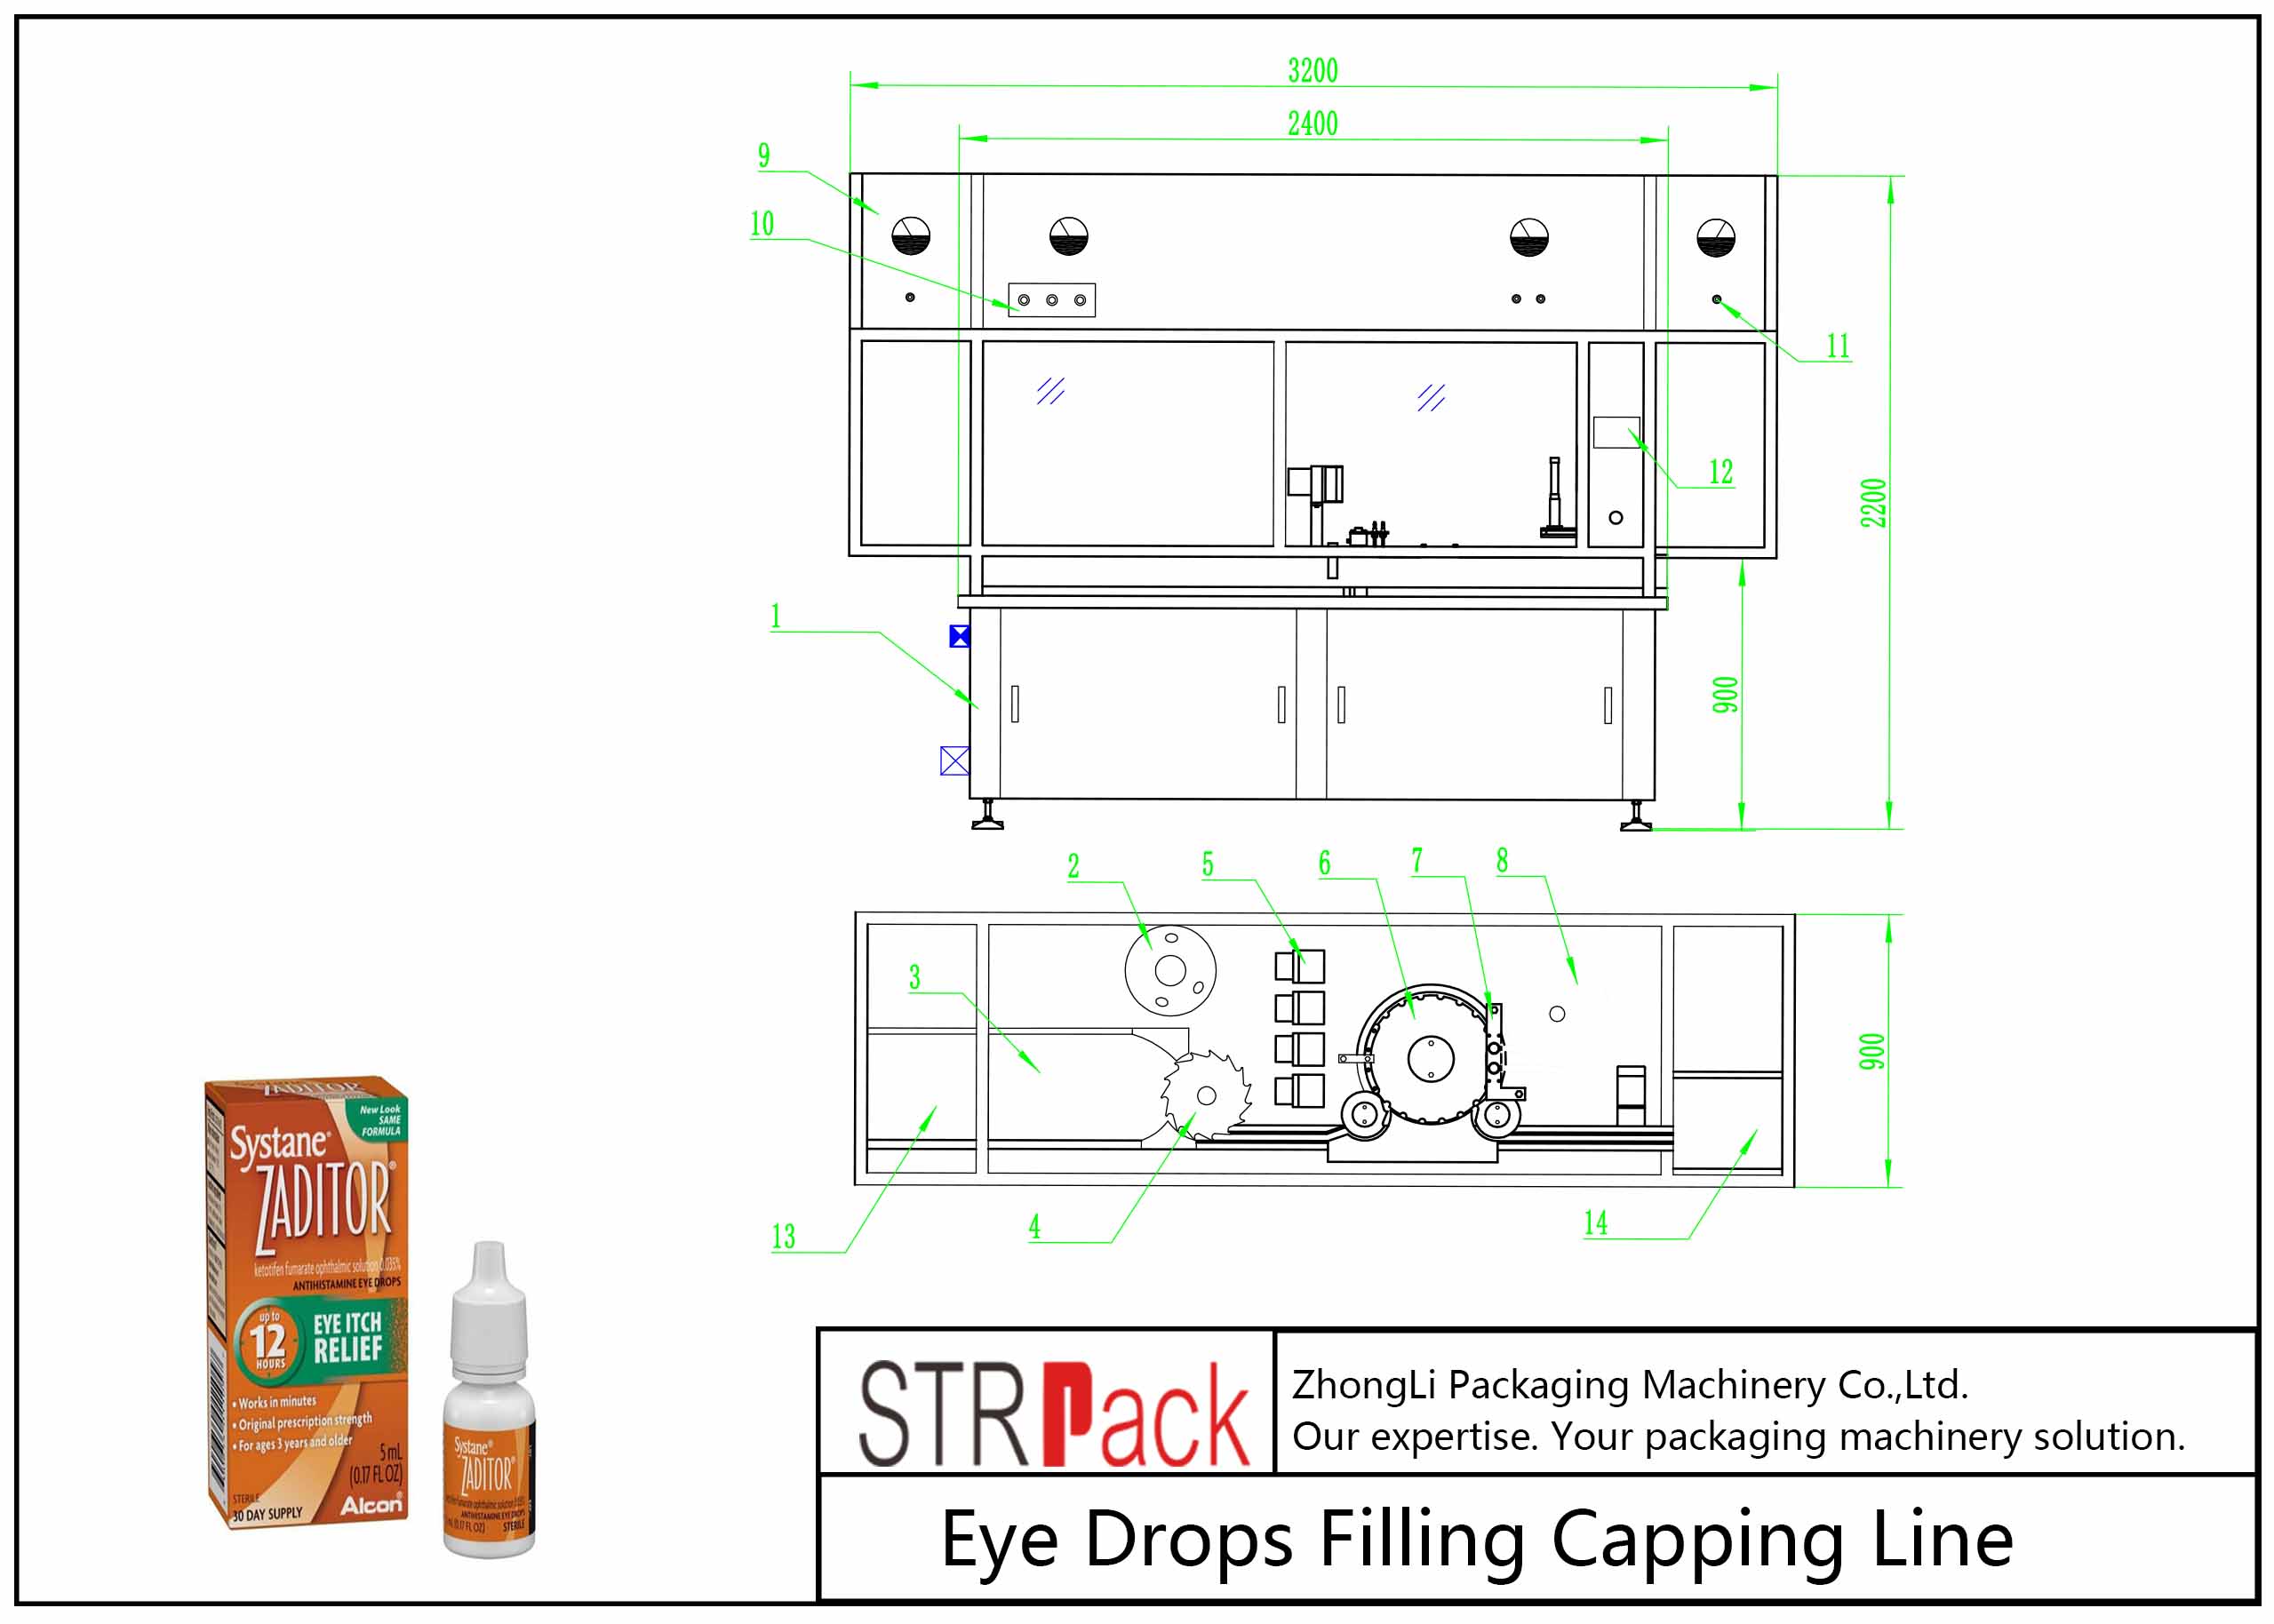 Automatic Eye Drops Filling Capping Line